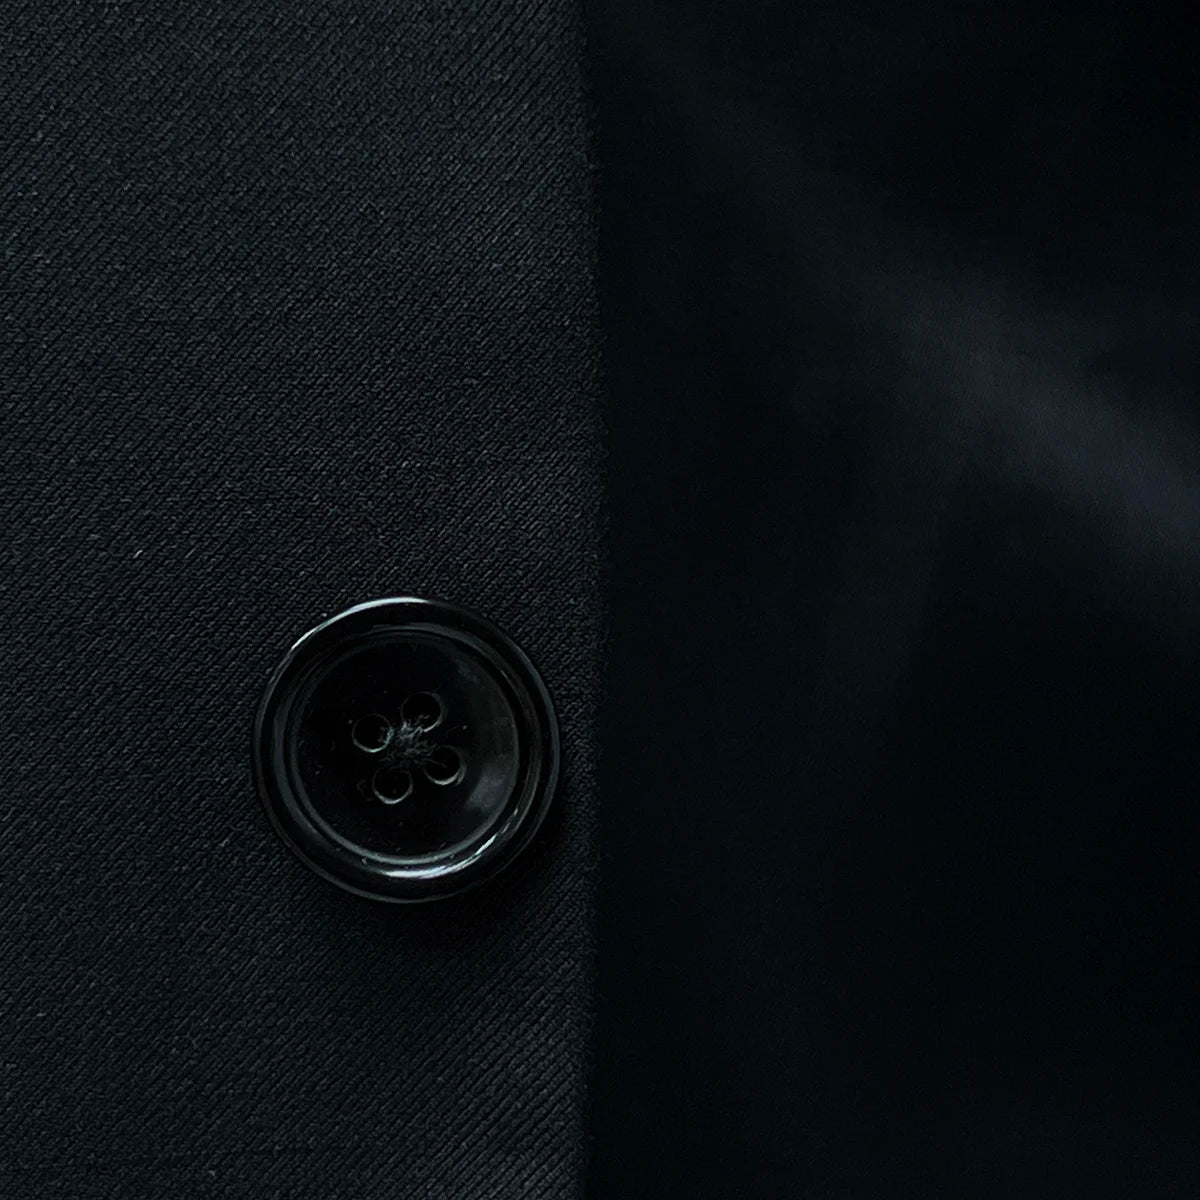 Horn buttons enhancing the traditional elegance of a classic black men's suit.